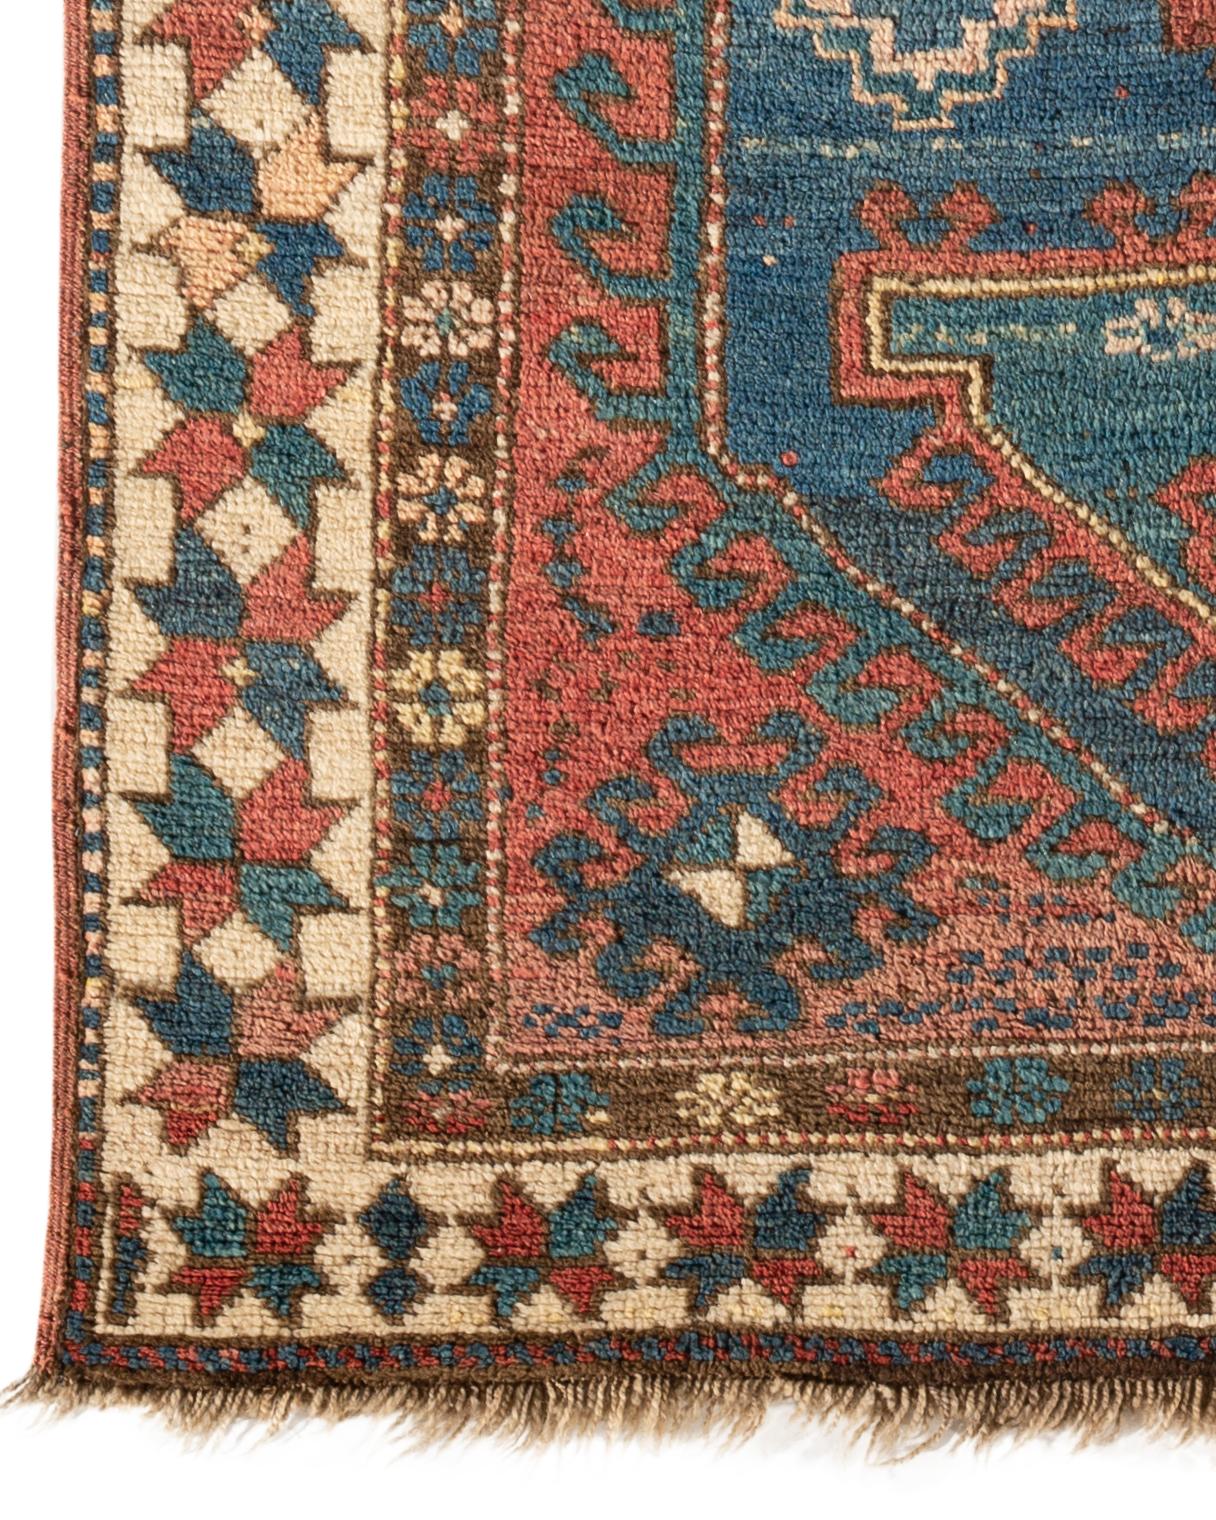 Antique Caucasian Kazak Rug, circa 1890. A south west Caucasian Kazak hand woven rug circa 1890 With a central blue design within a red field showing ethnic drawings surrounded by an ivory border. The Caucasus Mountains, between Persia and Russia